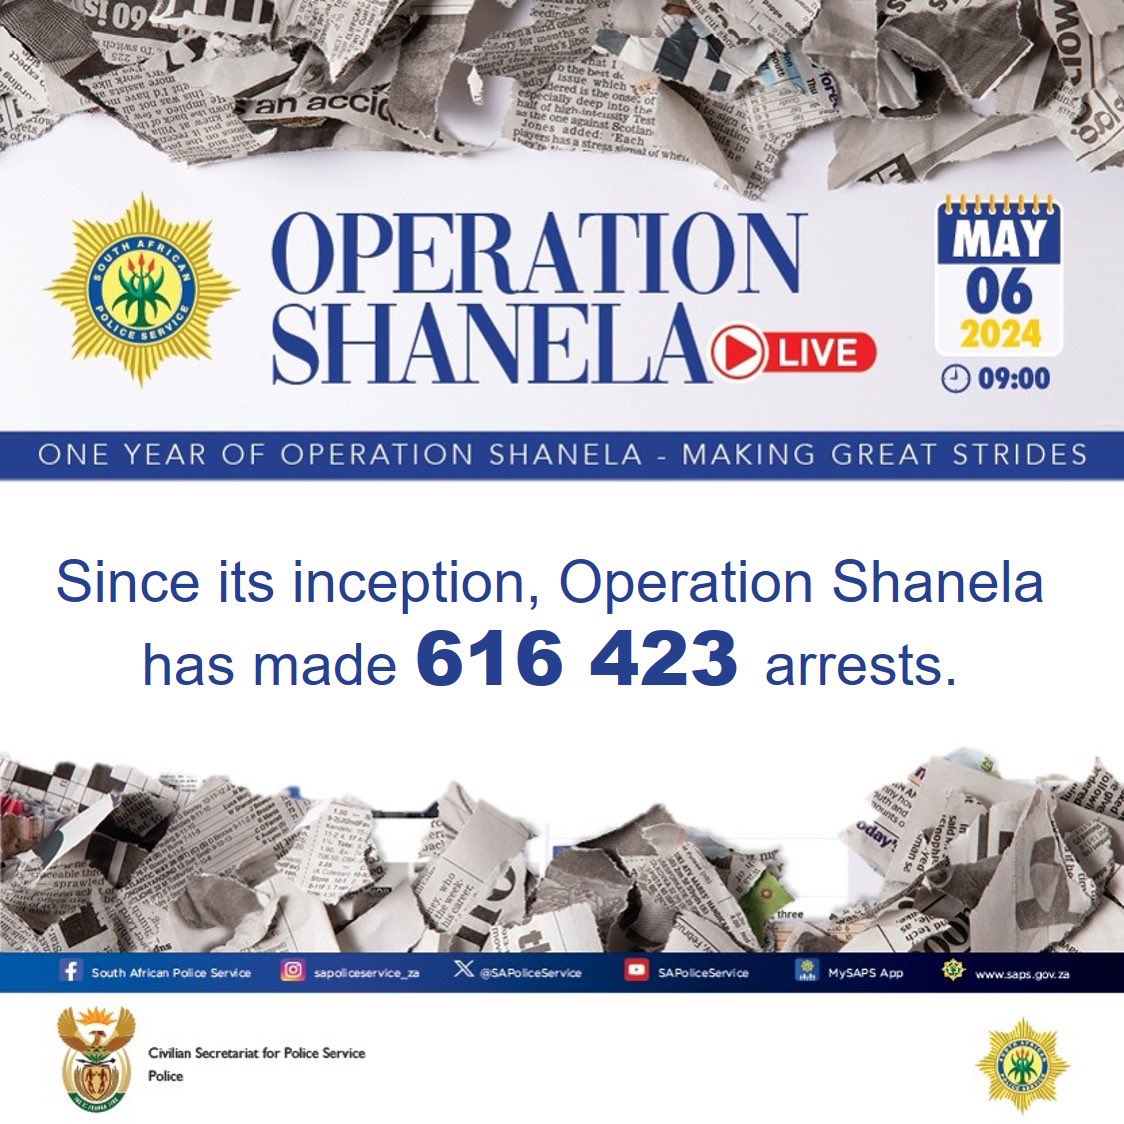 This week marks a year since police adopted OPERATION SHANELA. This is a multidisciplinary approach to fight crime by heightening police visibility. From 8May 2023 to date, 616 424 suspects have been arrested.22 525 unlicensed/illegal firearms have also been seized.